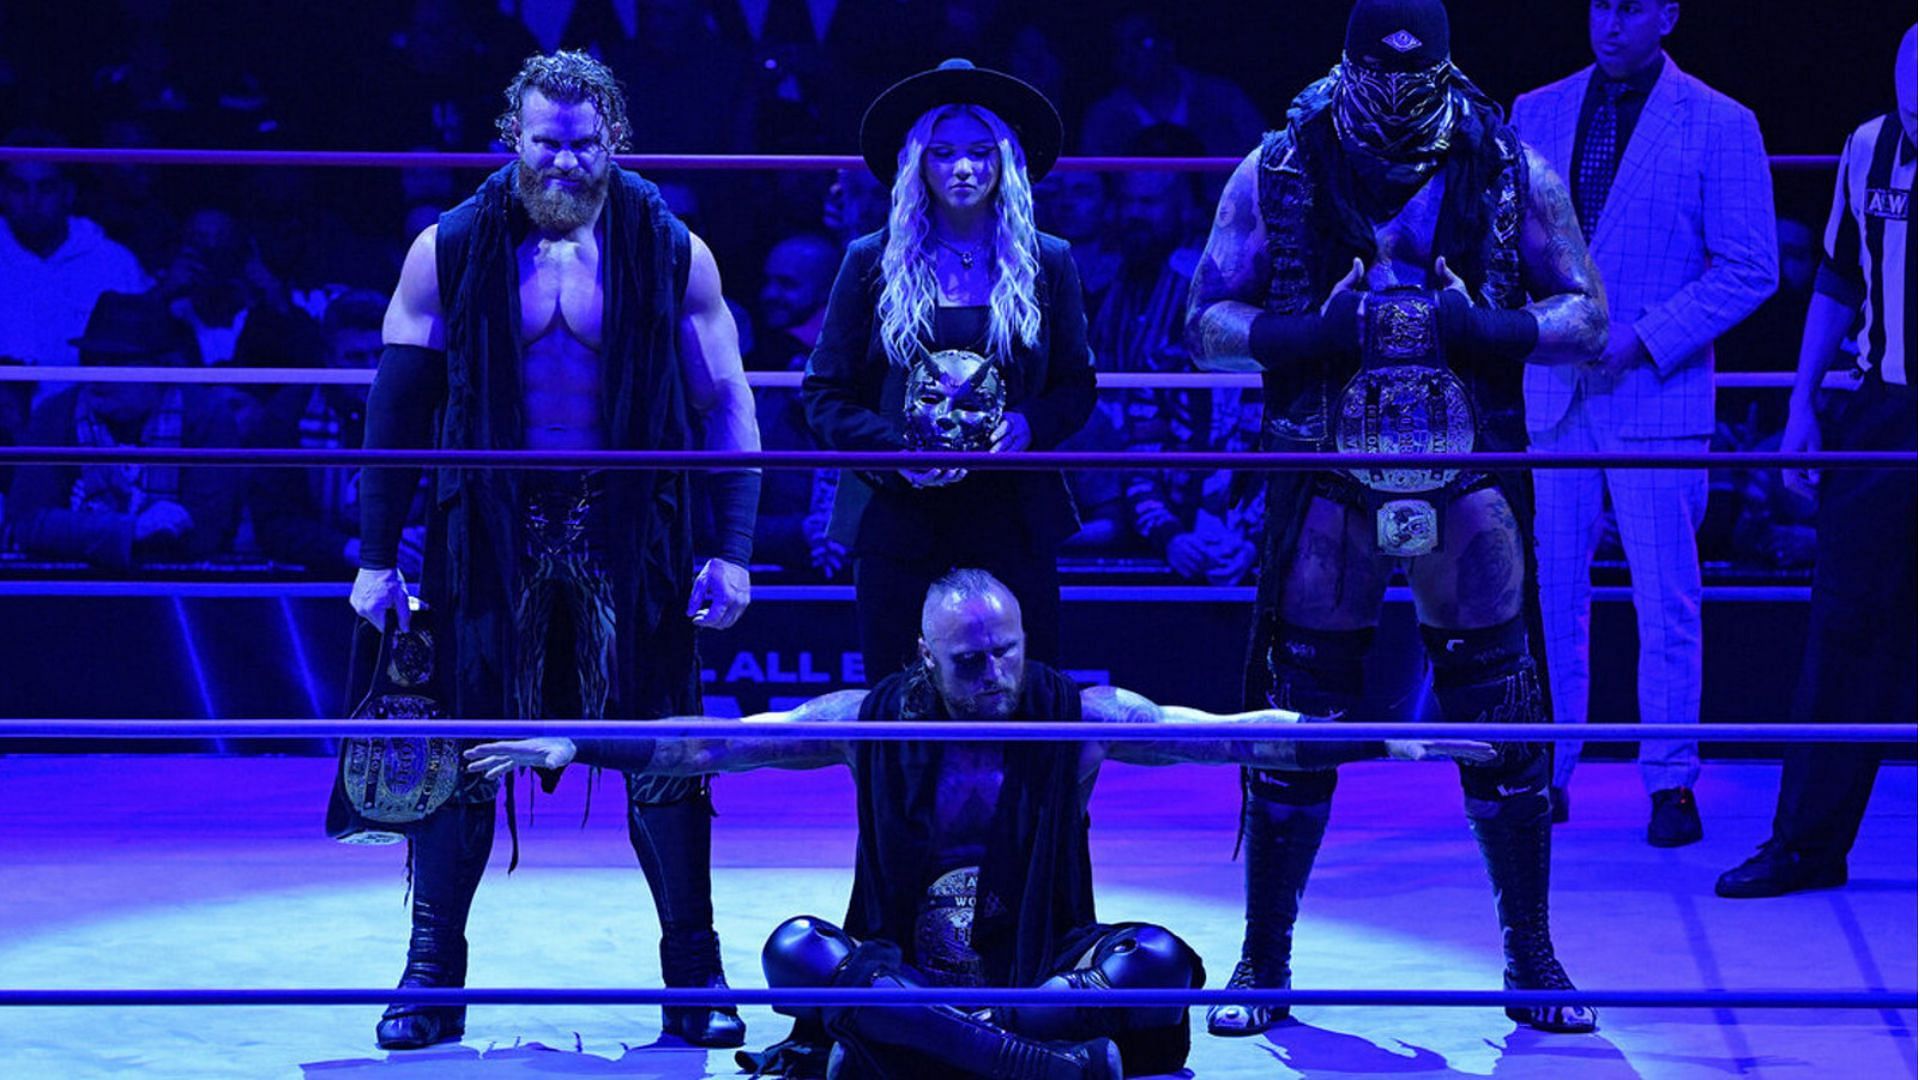 Will The House of Black go down as one of AEW